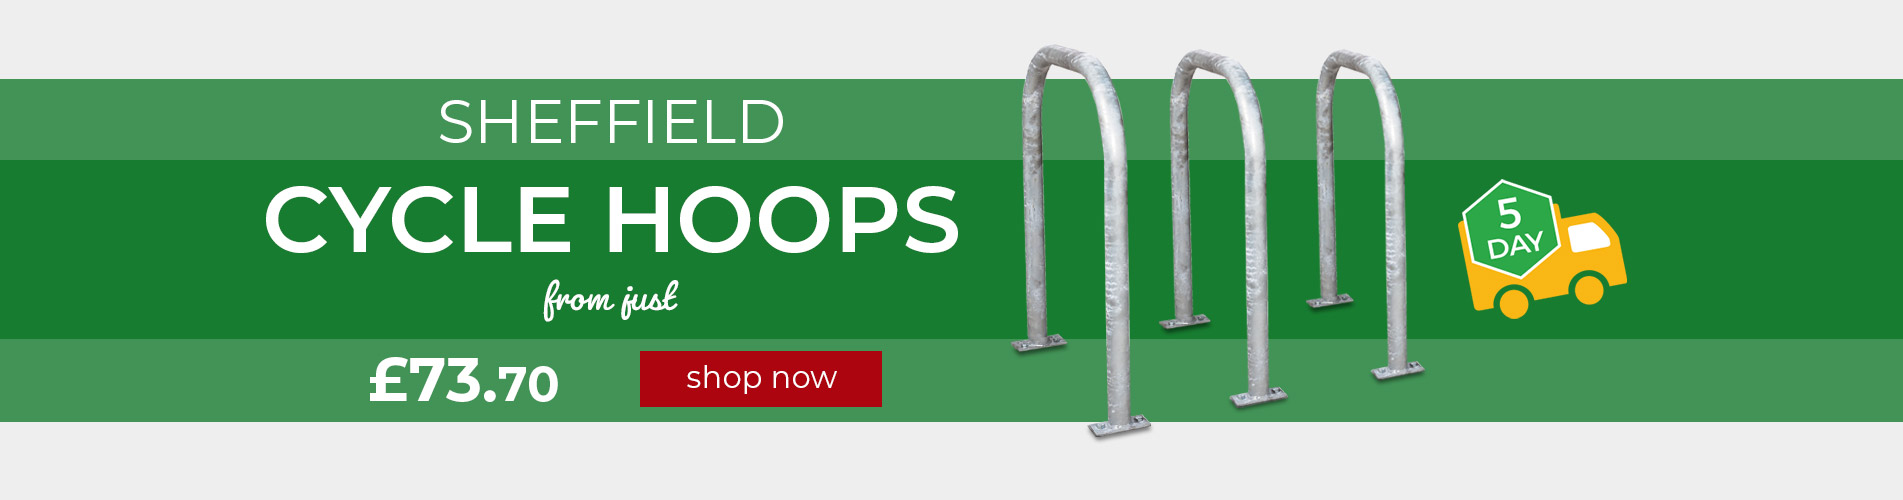 Sheffield Cycle Hoops on 5 Day Delivery